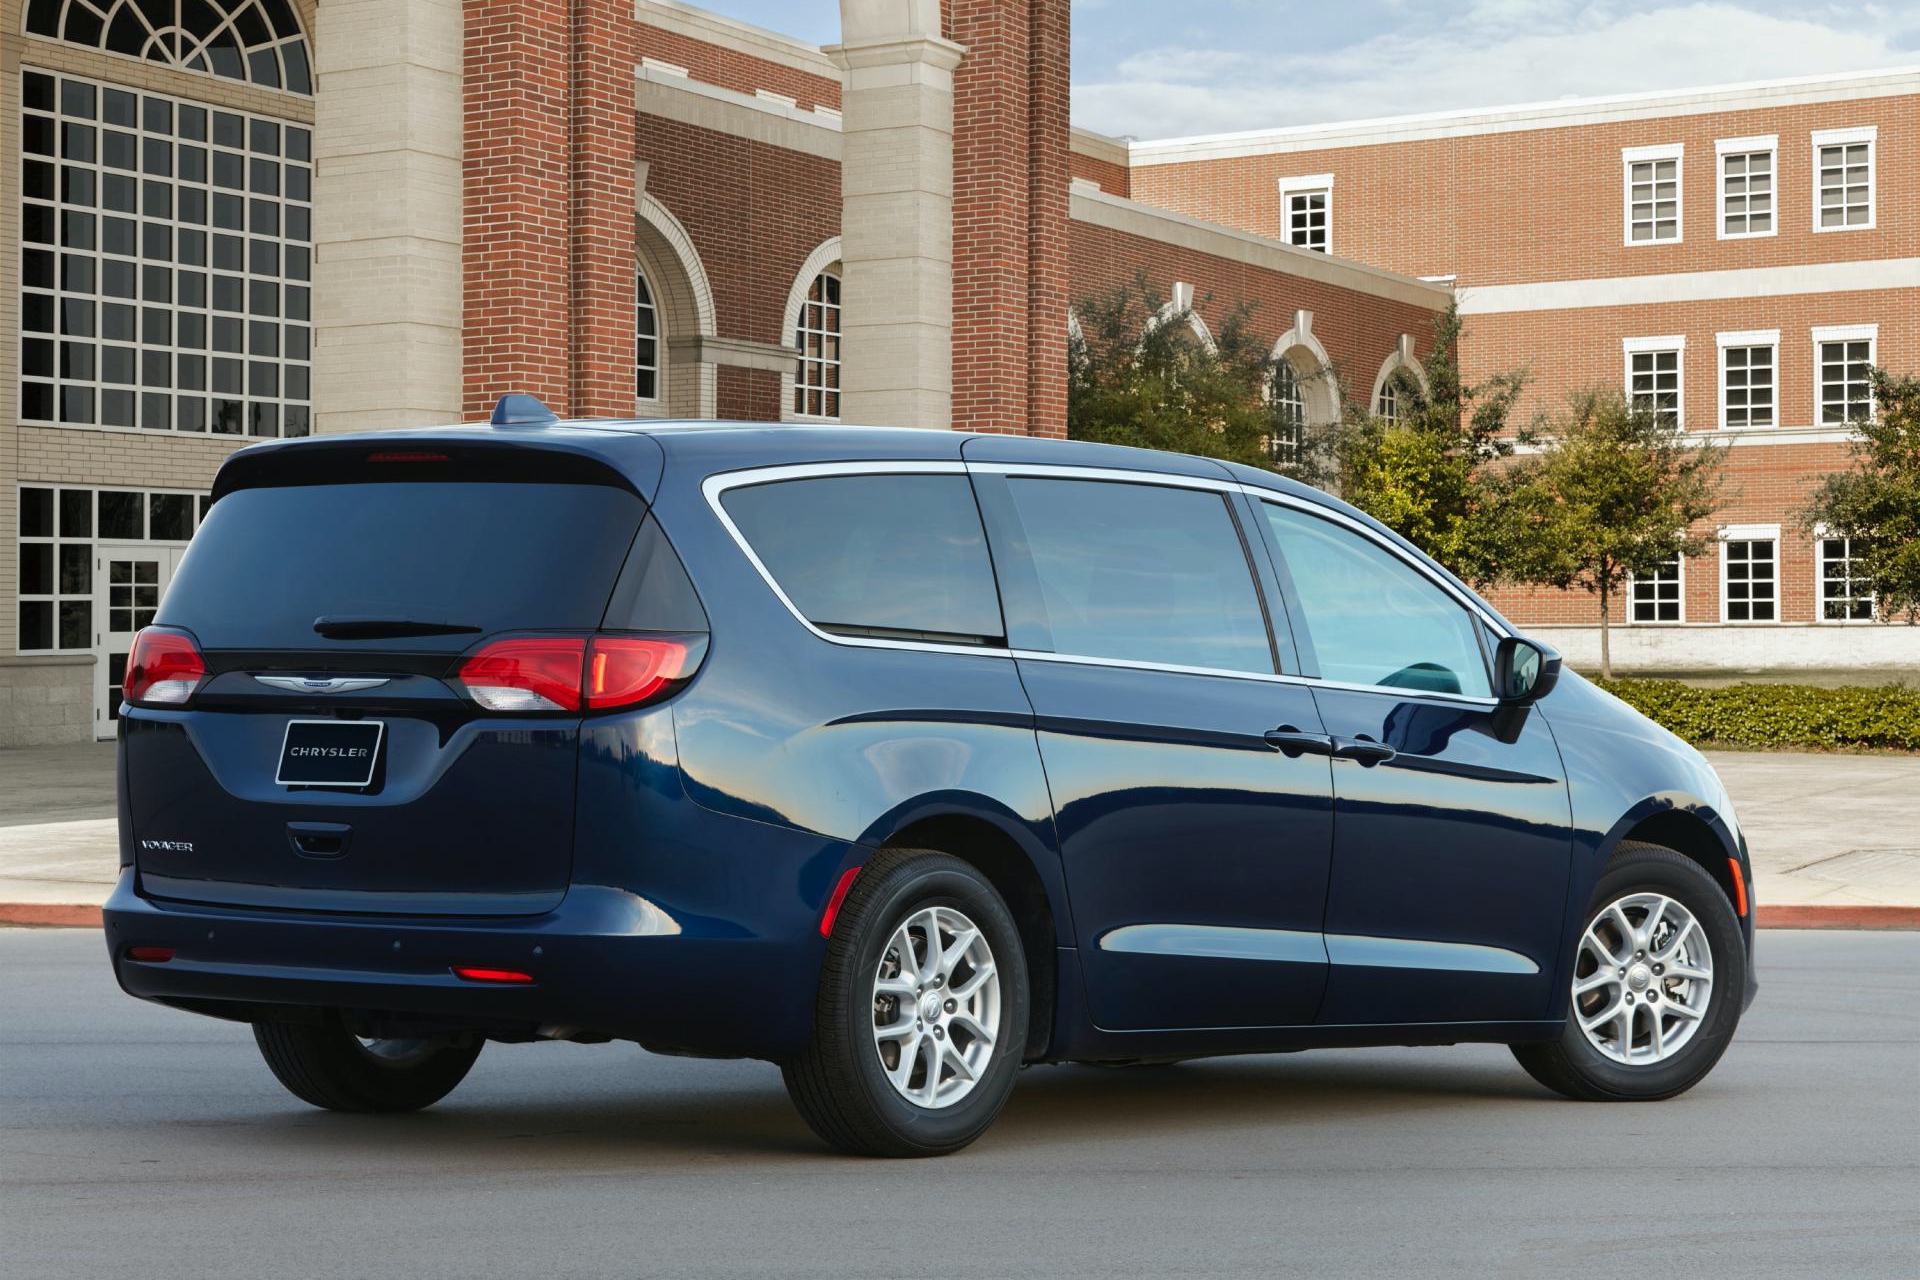 The 2021 Chrysler Voyager Wont Be Getting The Pacificas Facelift